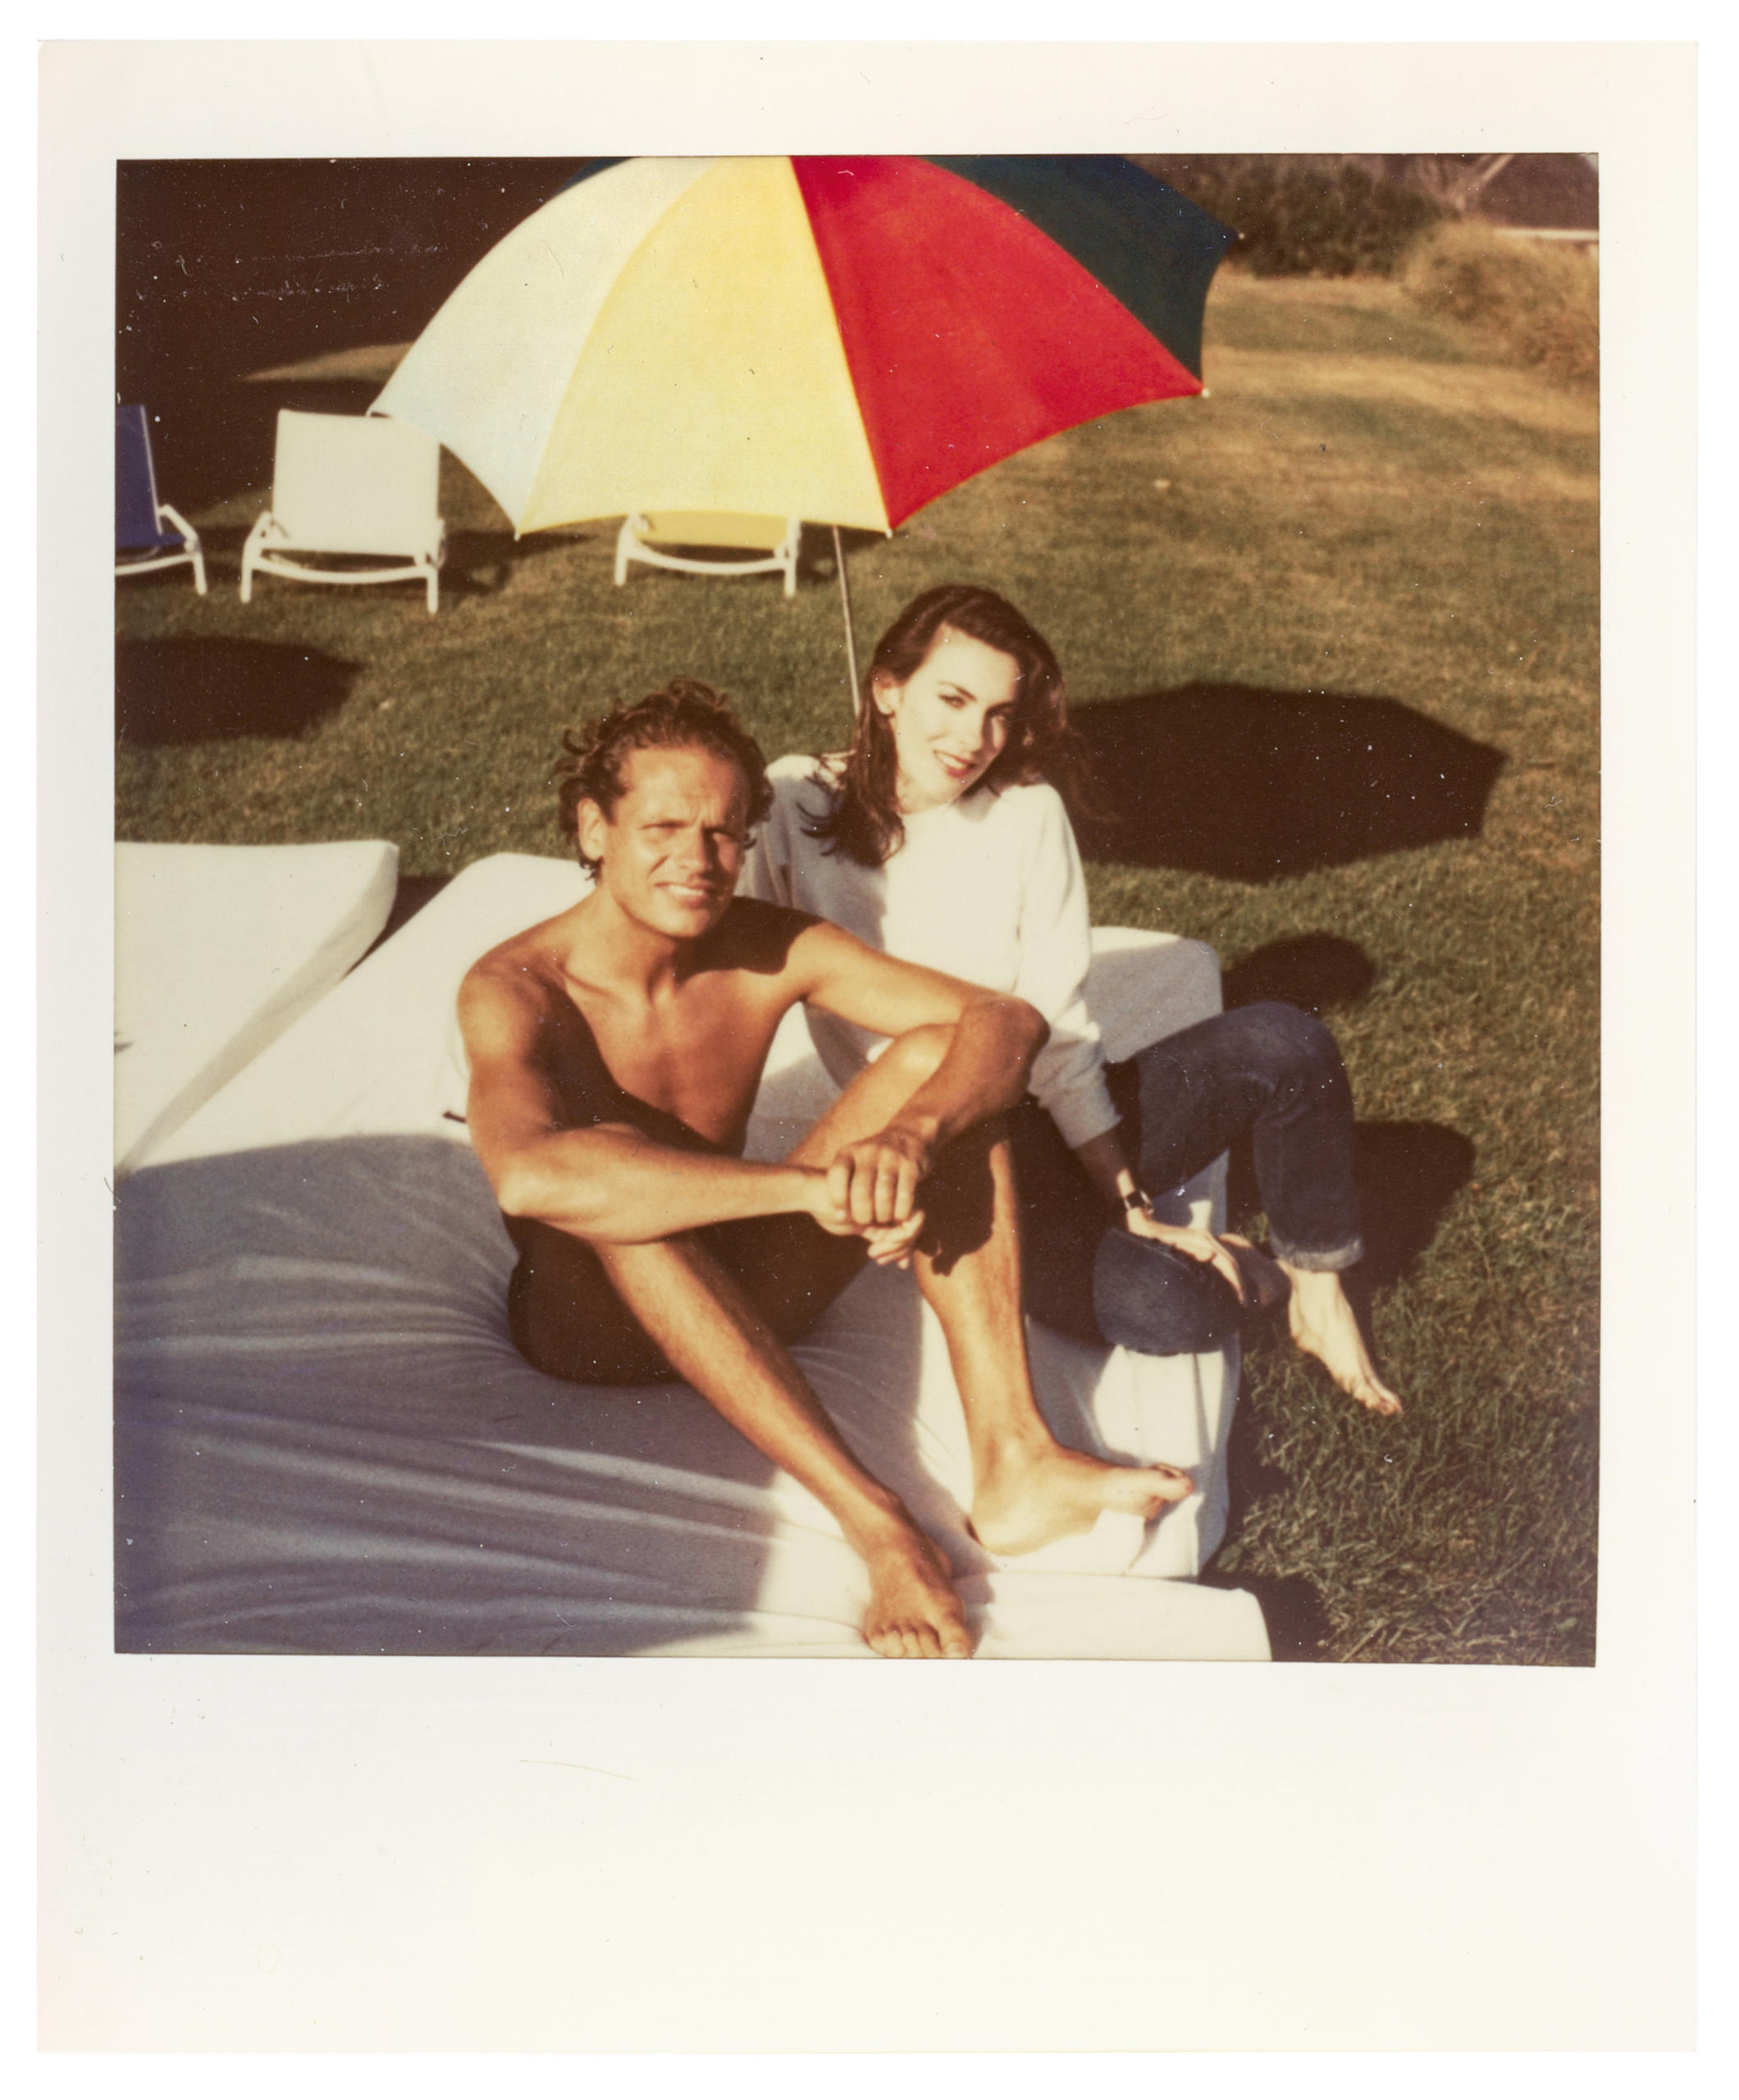 Kathryn Bigelow and Brunner, East Hampton. Photographed in c. 1983 by Thomas Ammann.